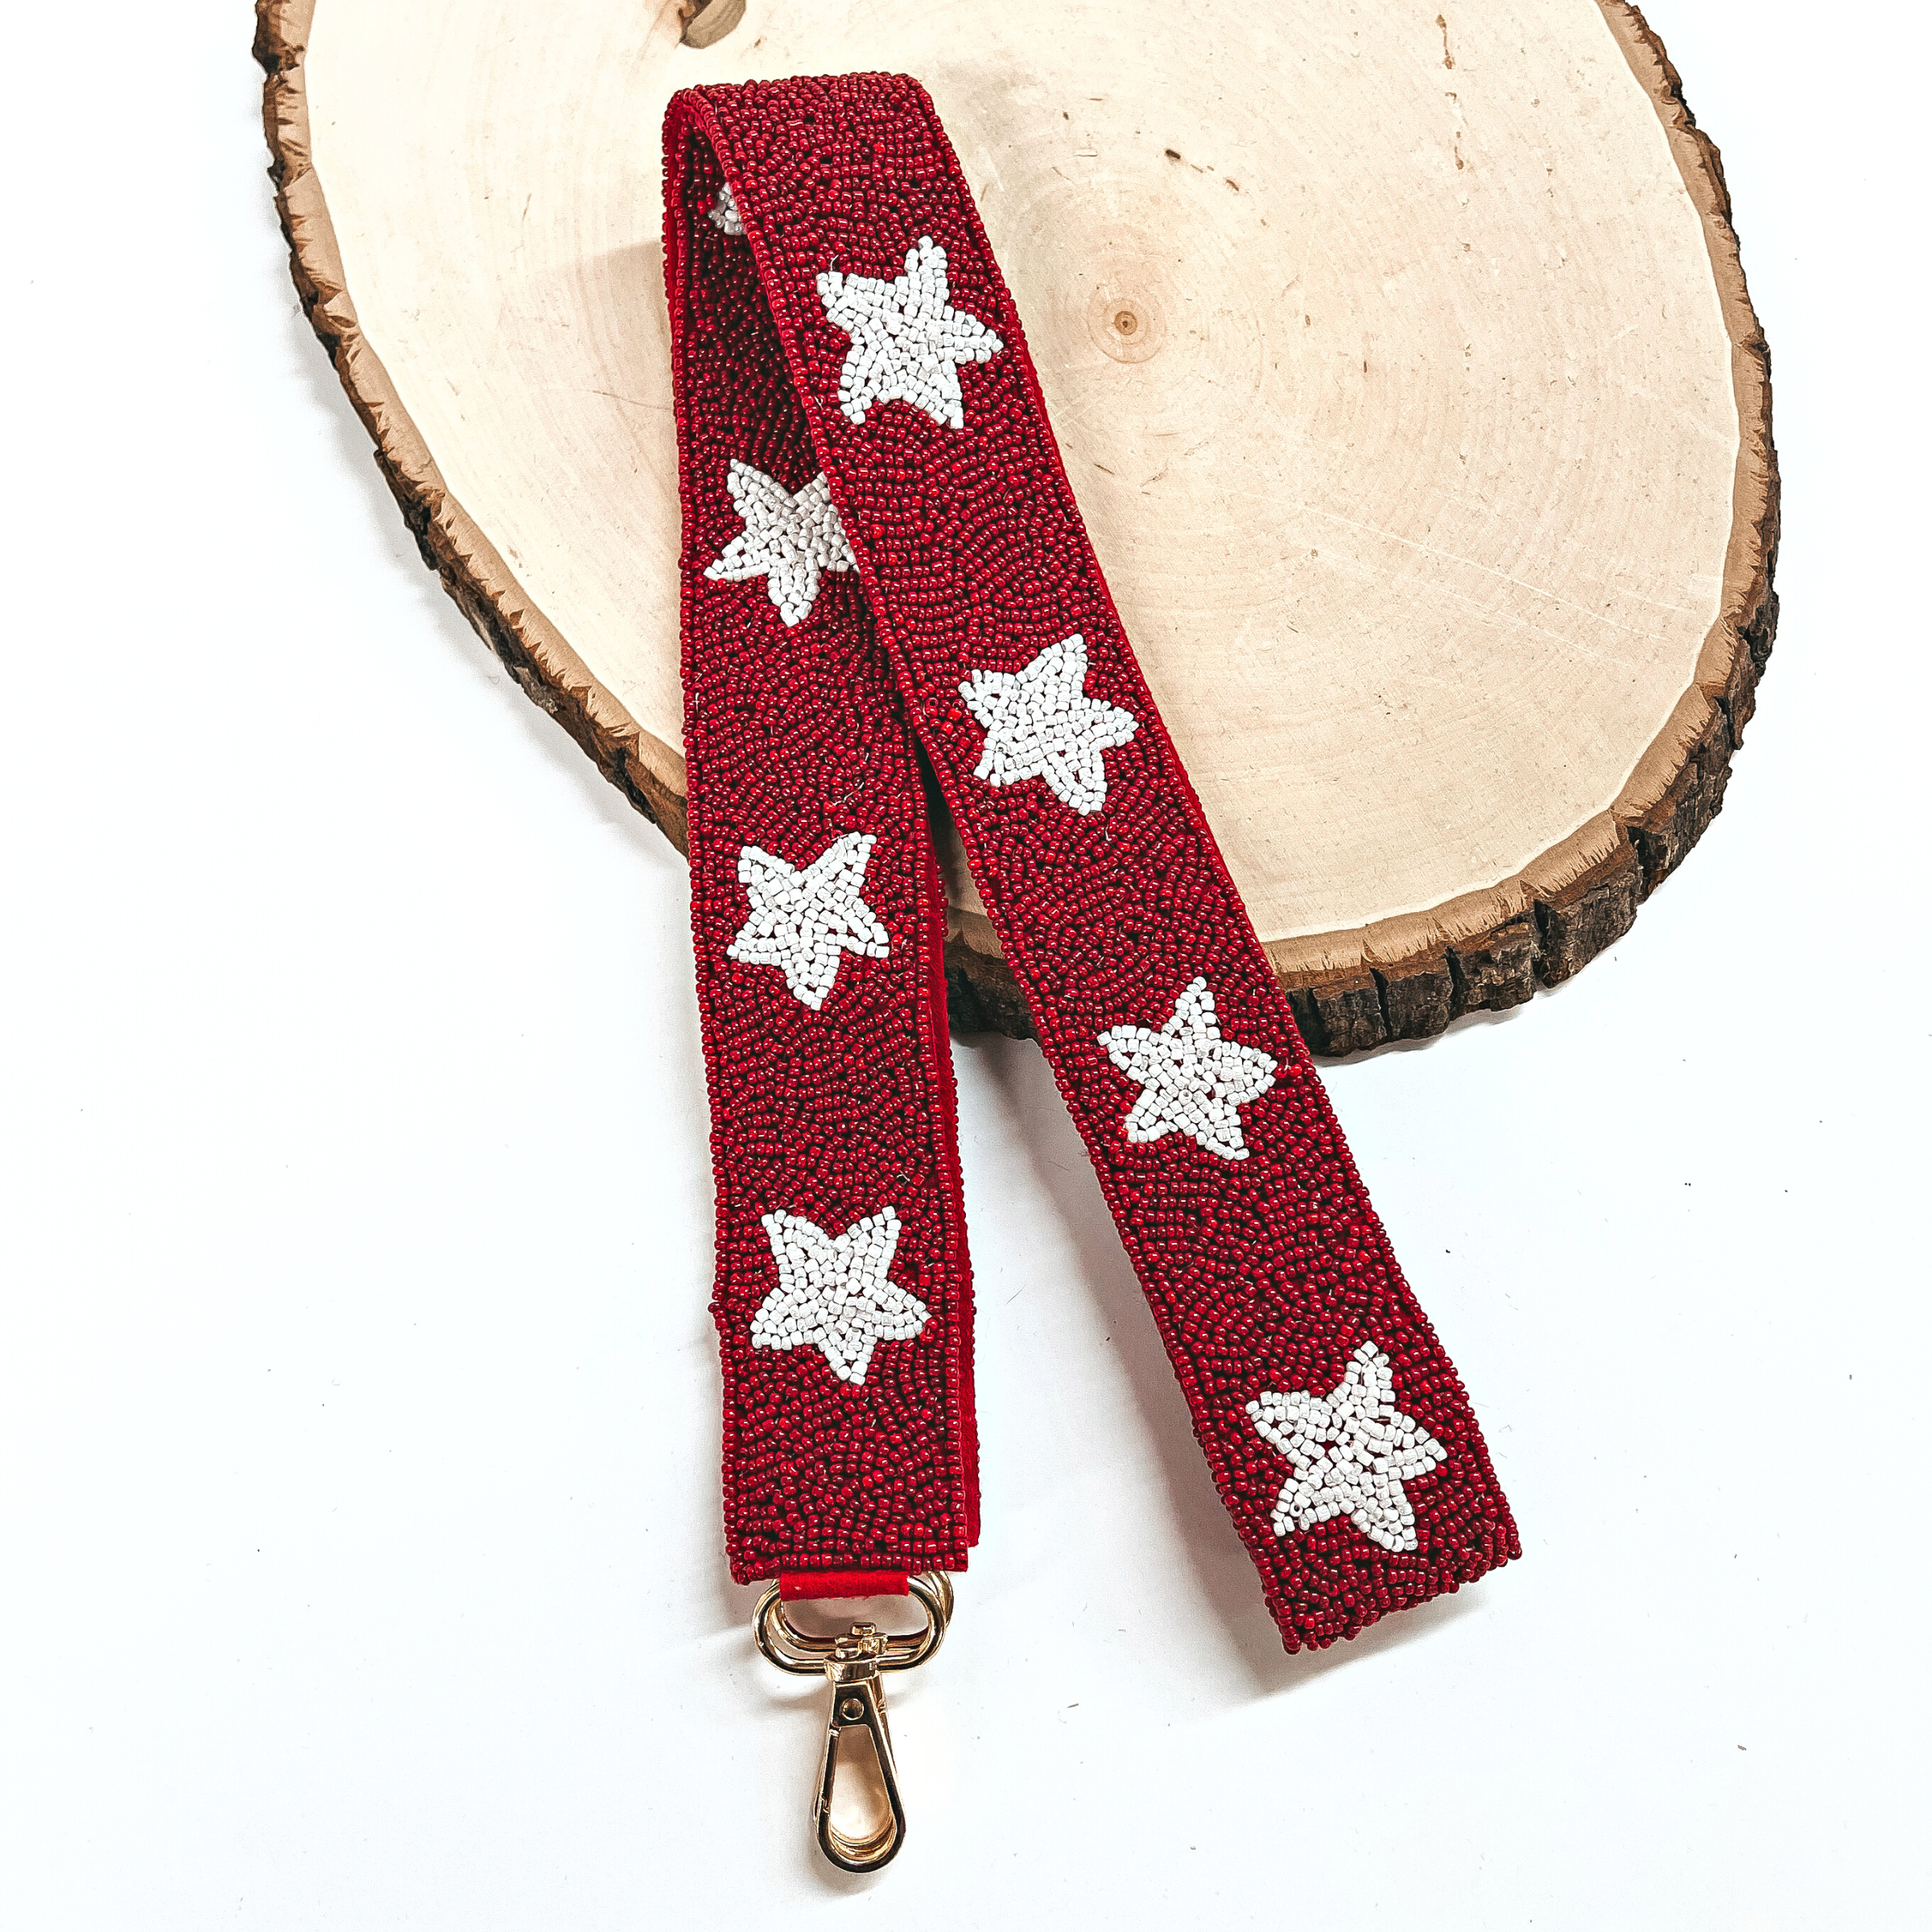 This is a maroon/dark red beaded purse strap with white beaded stars all along and a gold clasp. This purse strap is taken on a slab of wood and on a white background.